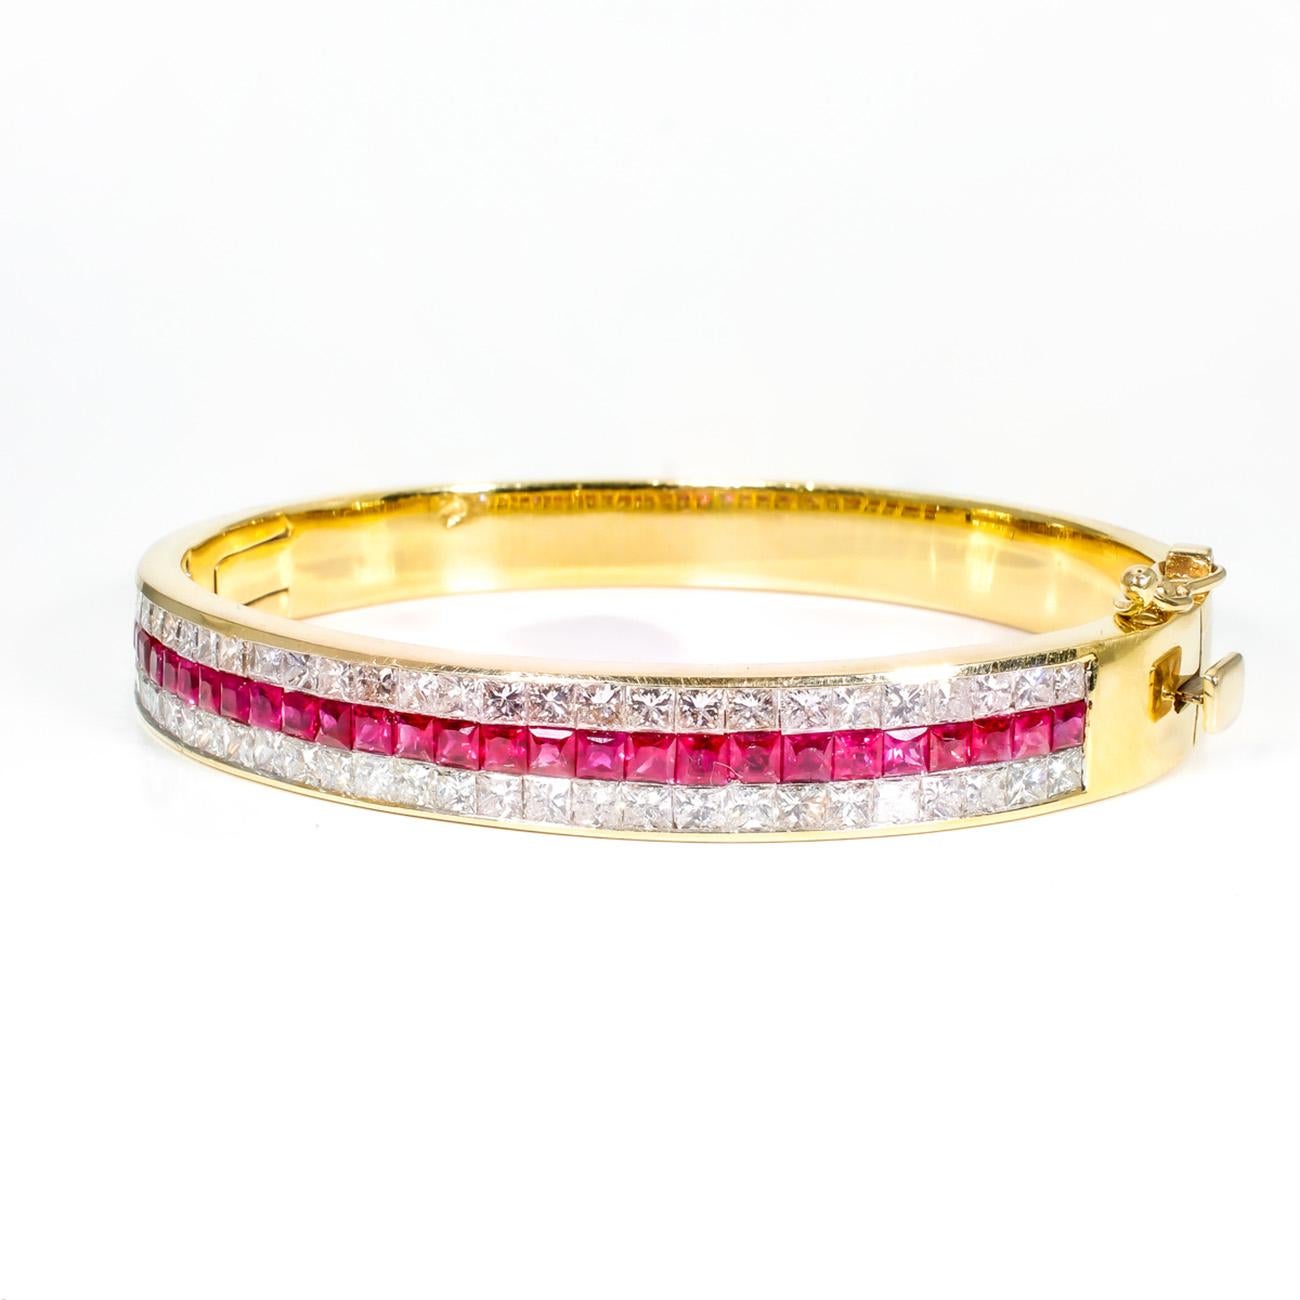 Women's Bangle with Rubies and Princess Cut Diamonds. D4.02ct.t.w.  Rubies 2.76ct.t.w. For Sale